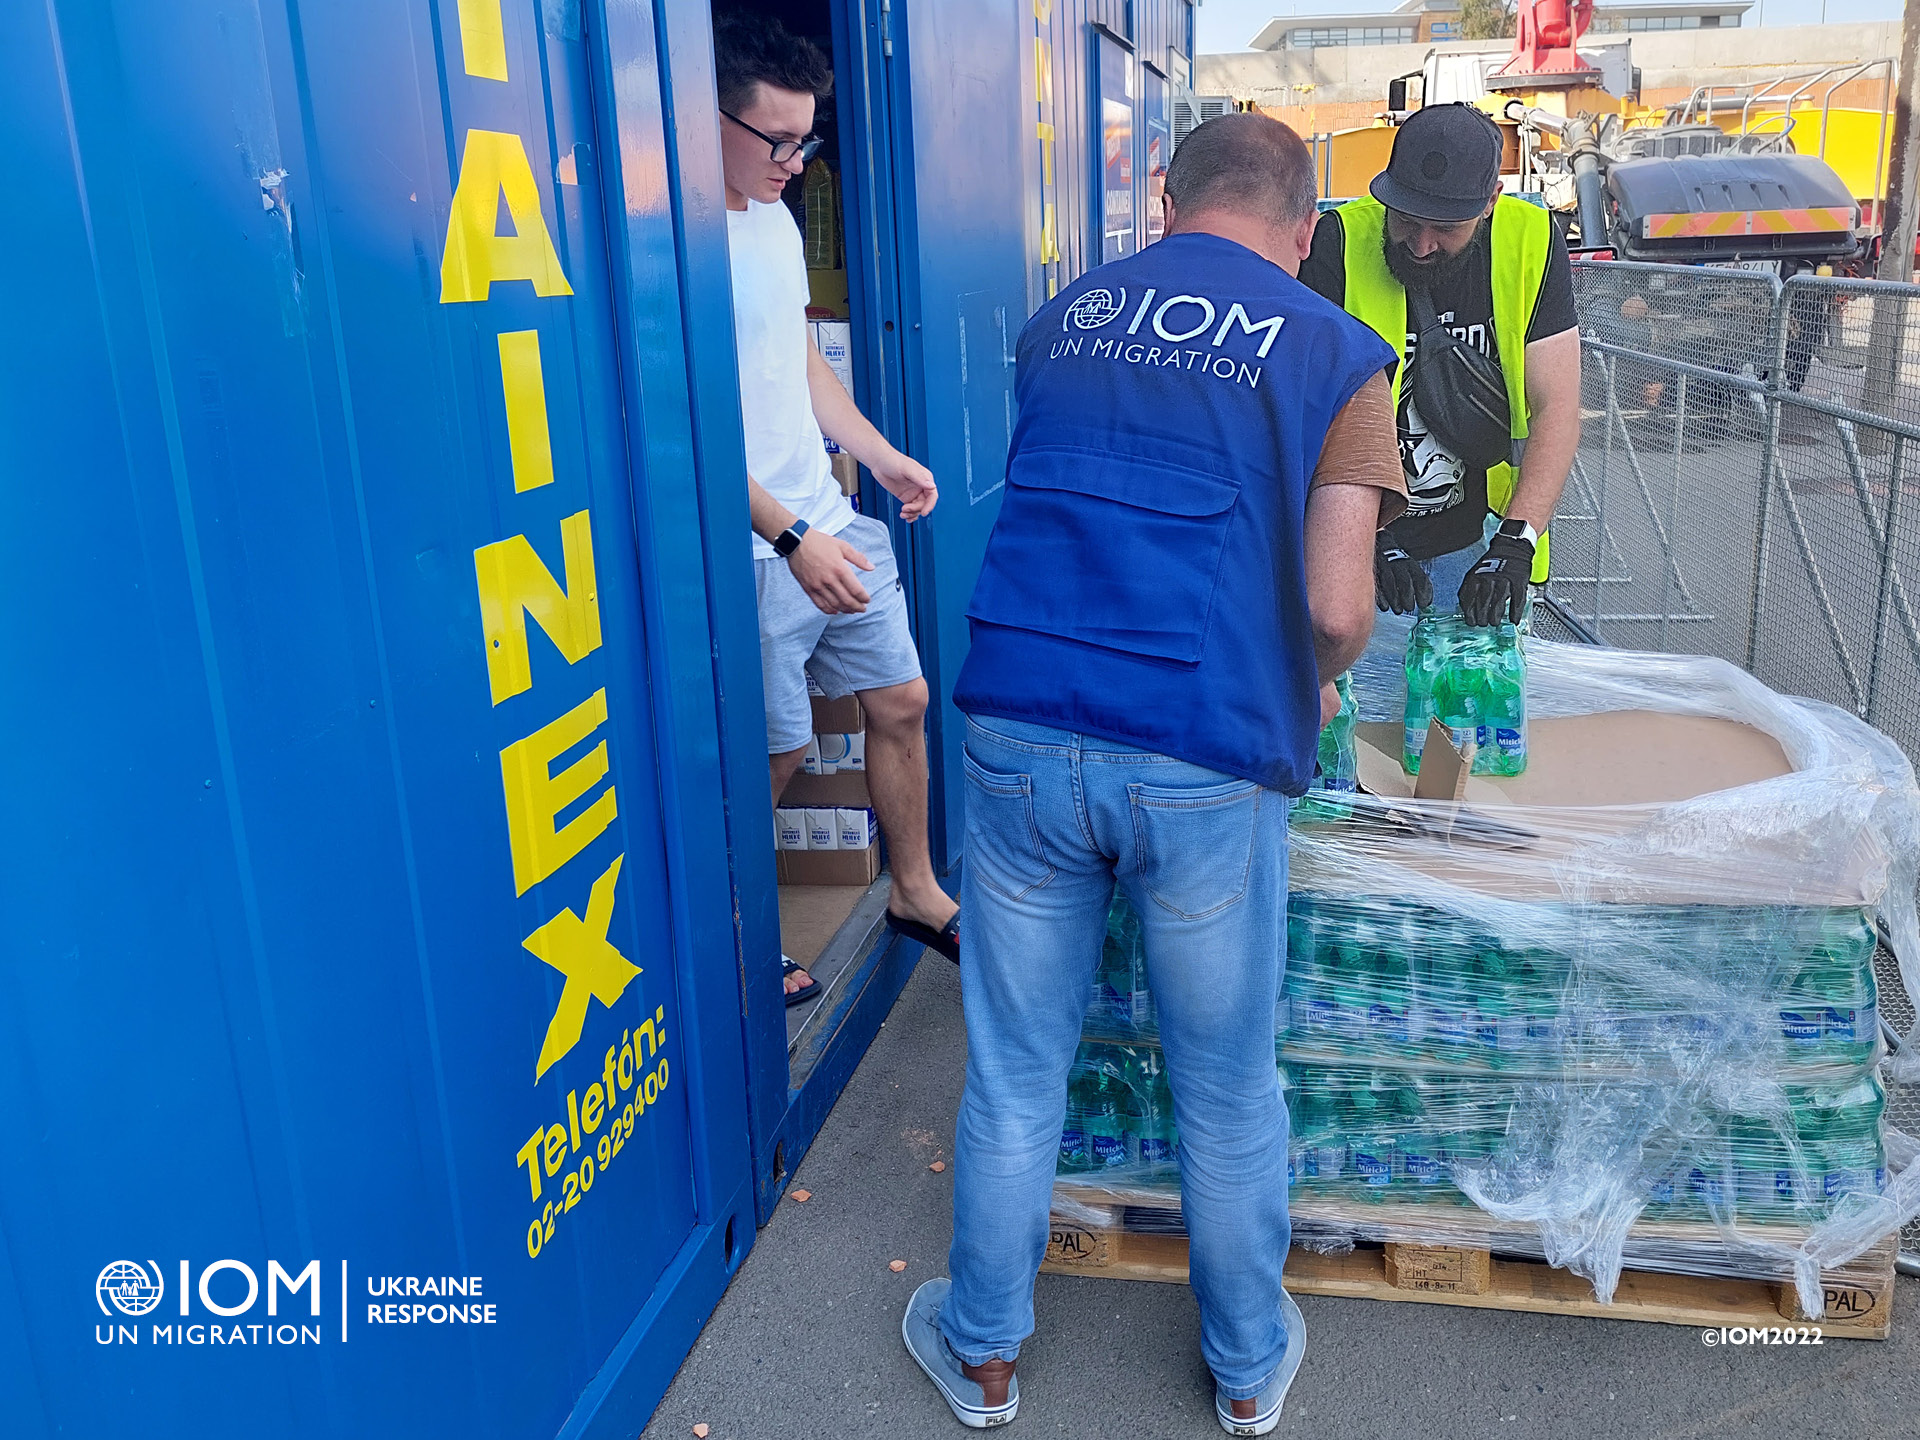 Delivery of food humanitarian assistance to the Kosice hotspot in July 2022. Photo © International Organization for Migration (IOM) 2022.